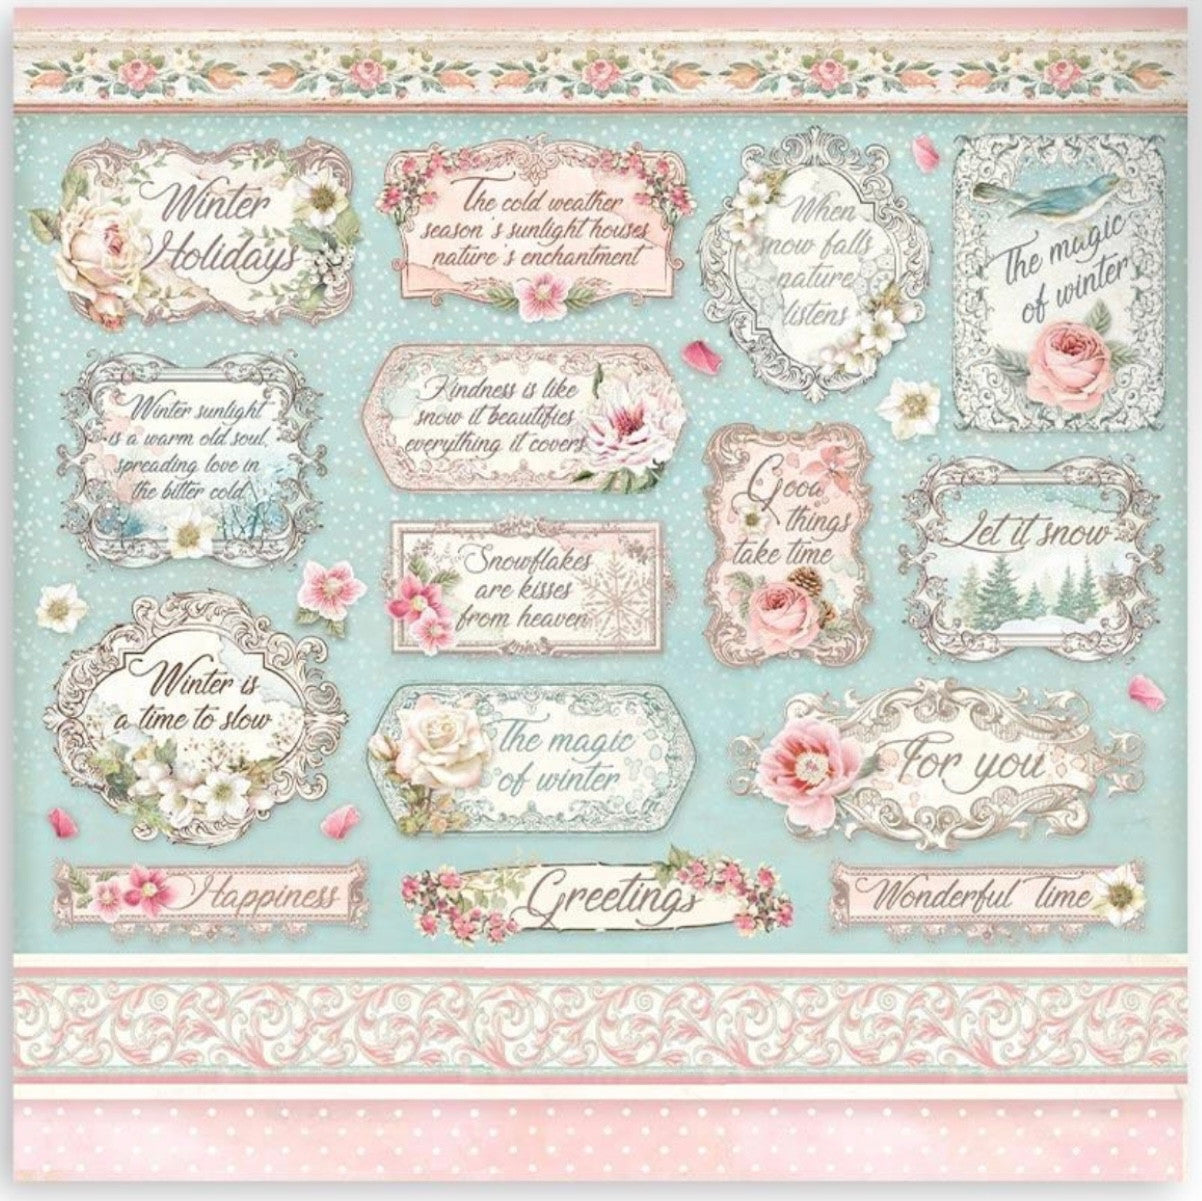 Stamperia Clockwise Collection 12x12 Scrapbooking Paper Double Sided Paper  12 X 12 Inch Acid Free Paper New 